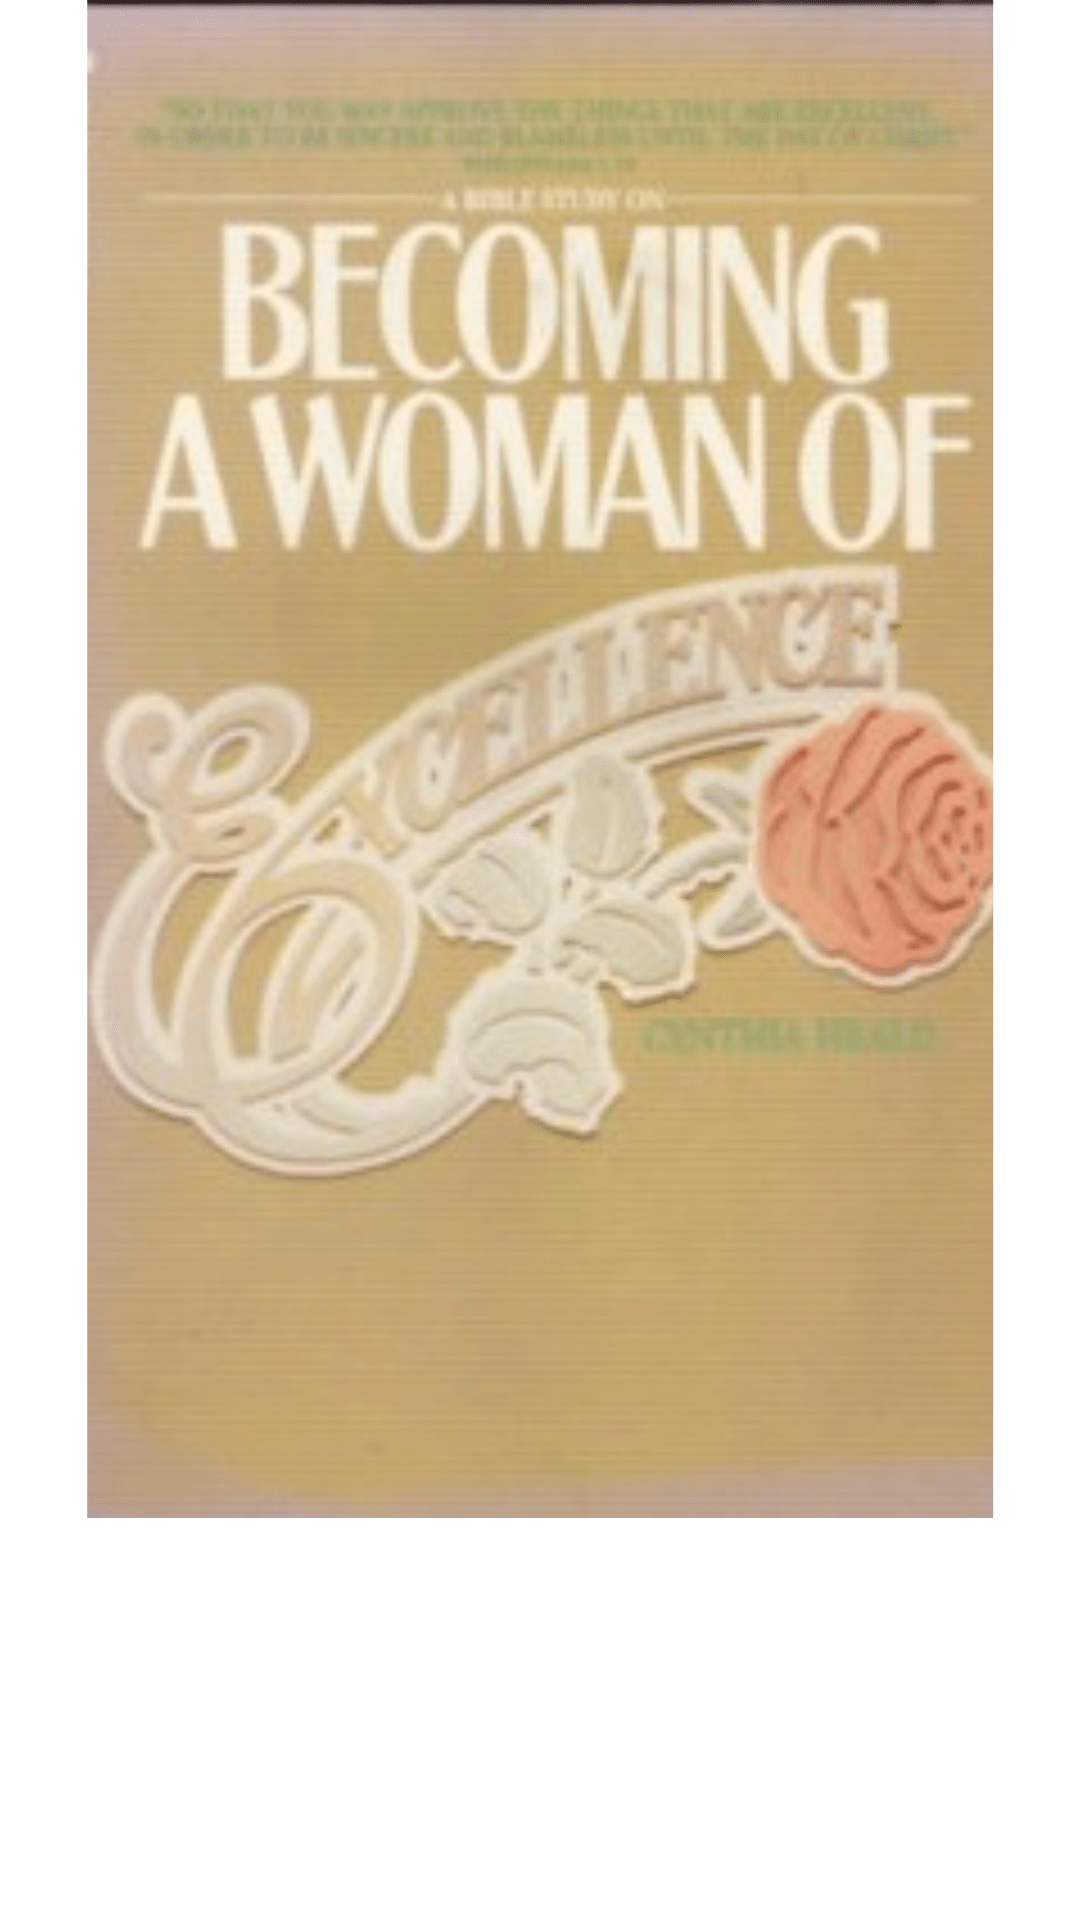 Becoming a Woman of Excellence by Cynthia Heald